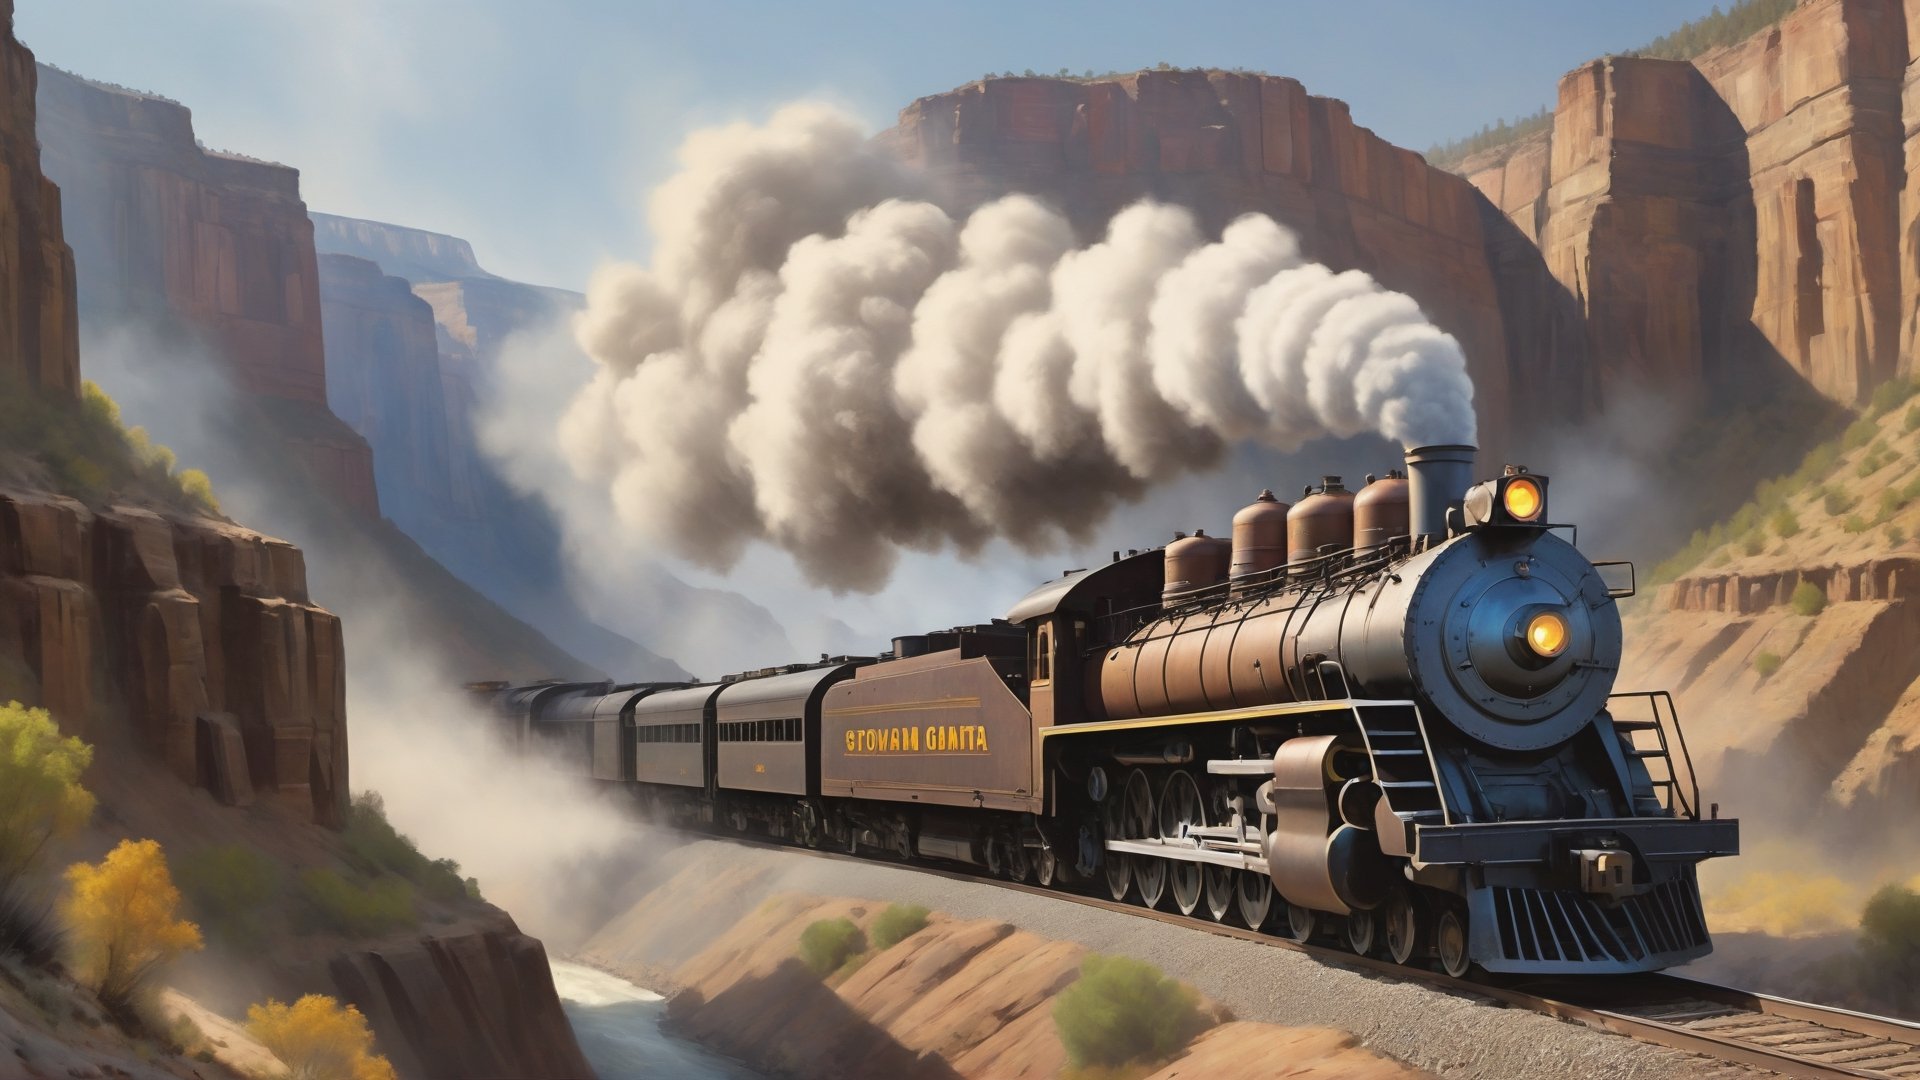 In this hyper-realistic image prompt, envision a steam locomotive from the Western frontier era traversing a deep canyon. The locomotive, a majestic iron giant, powers through the rugged terrain with purposeful determination. Its massive wheels grip the rails tightly as it navigates the winding curves of the canyon walls. Thick plumes of steam billow from its stack, blending with the dust kicked up by its wheels. The canyon itself is a spectacle of nature's grandeur, with towering cliffs rising high above the tracks and a meandering river below. Sunlight filters through the canyon, casting dynamic shadows and illuminating the intricate details of the locomotive's construction. In the distance, the canyon stretches into the horizon, hinting at the vast expanse of unexplored wilderness waiting beyond.